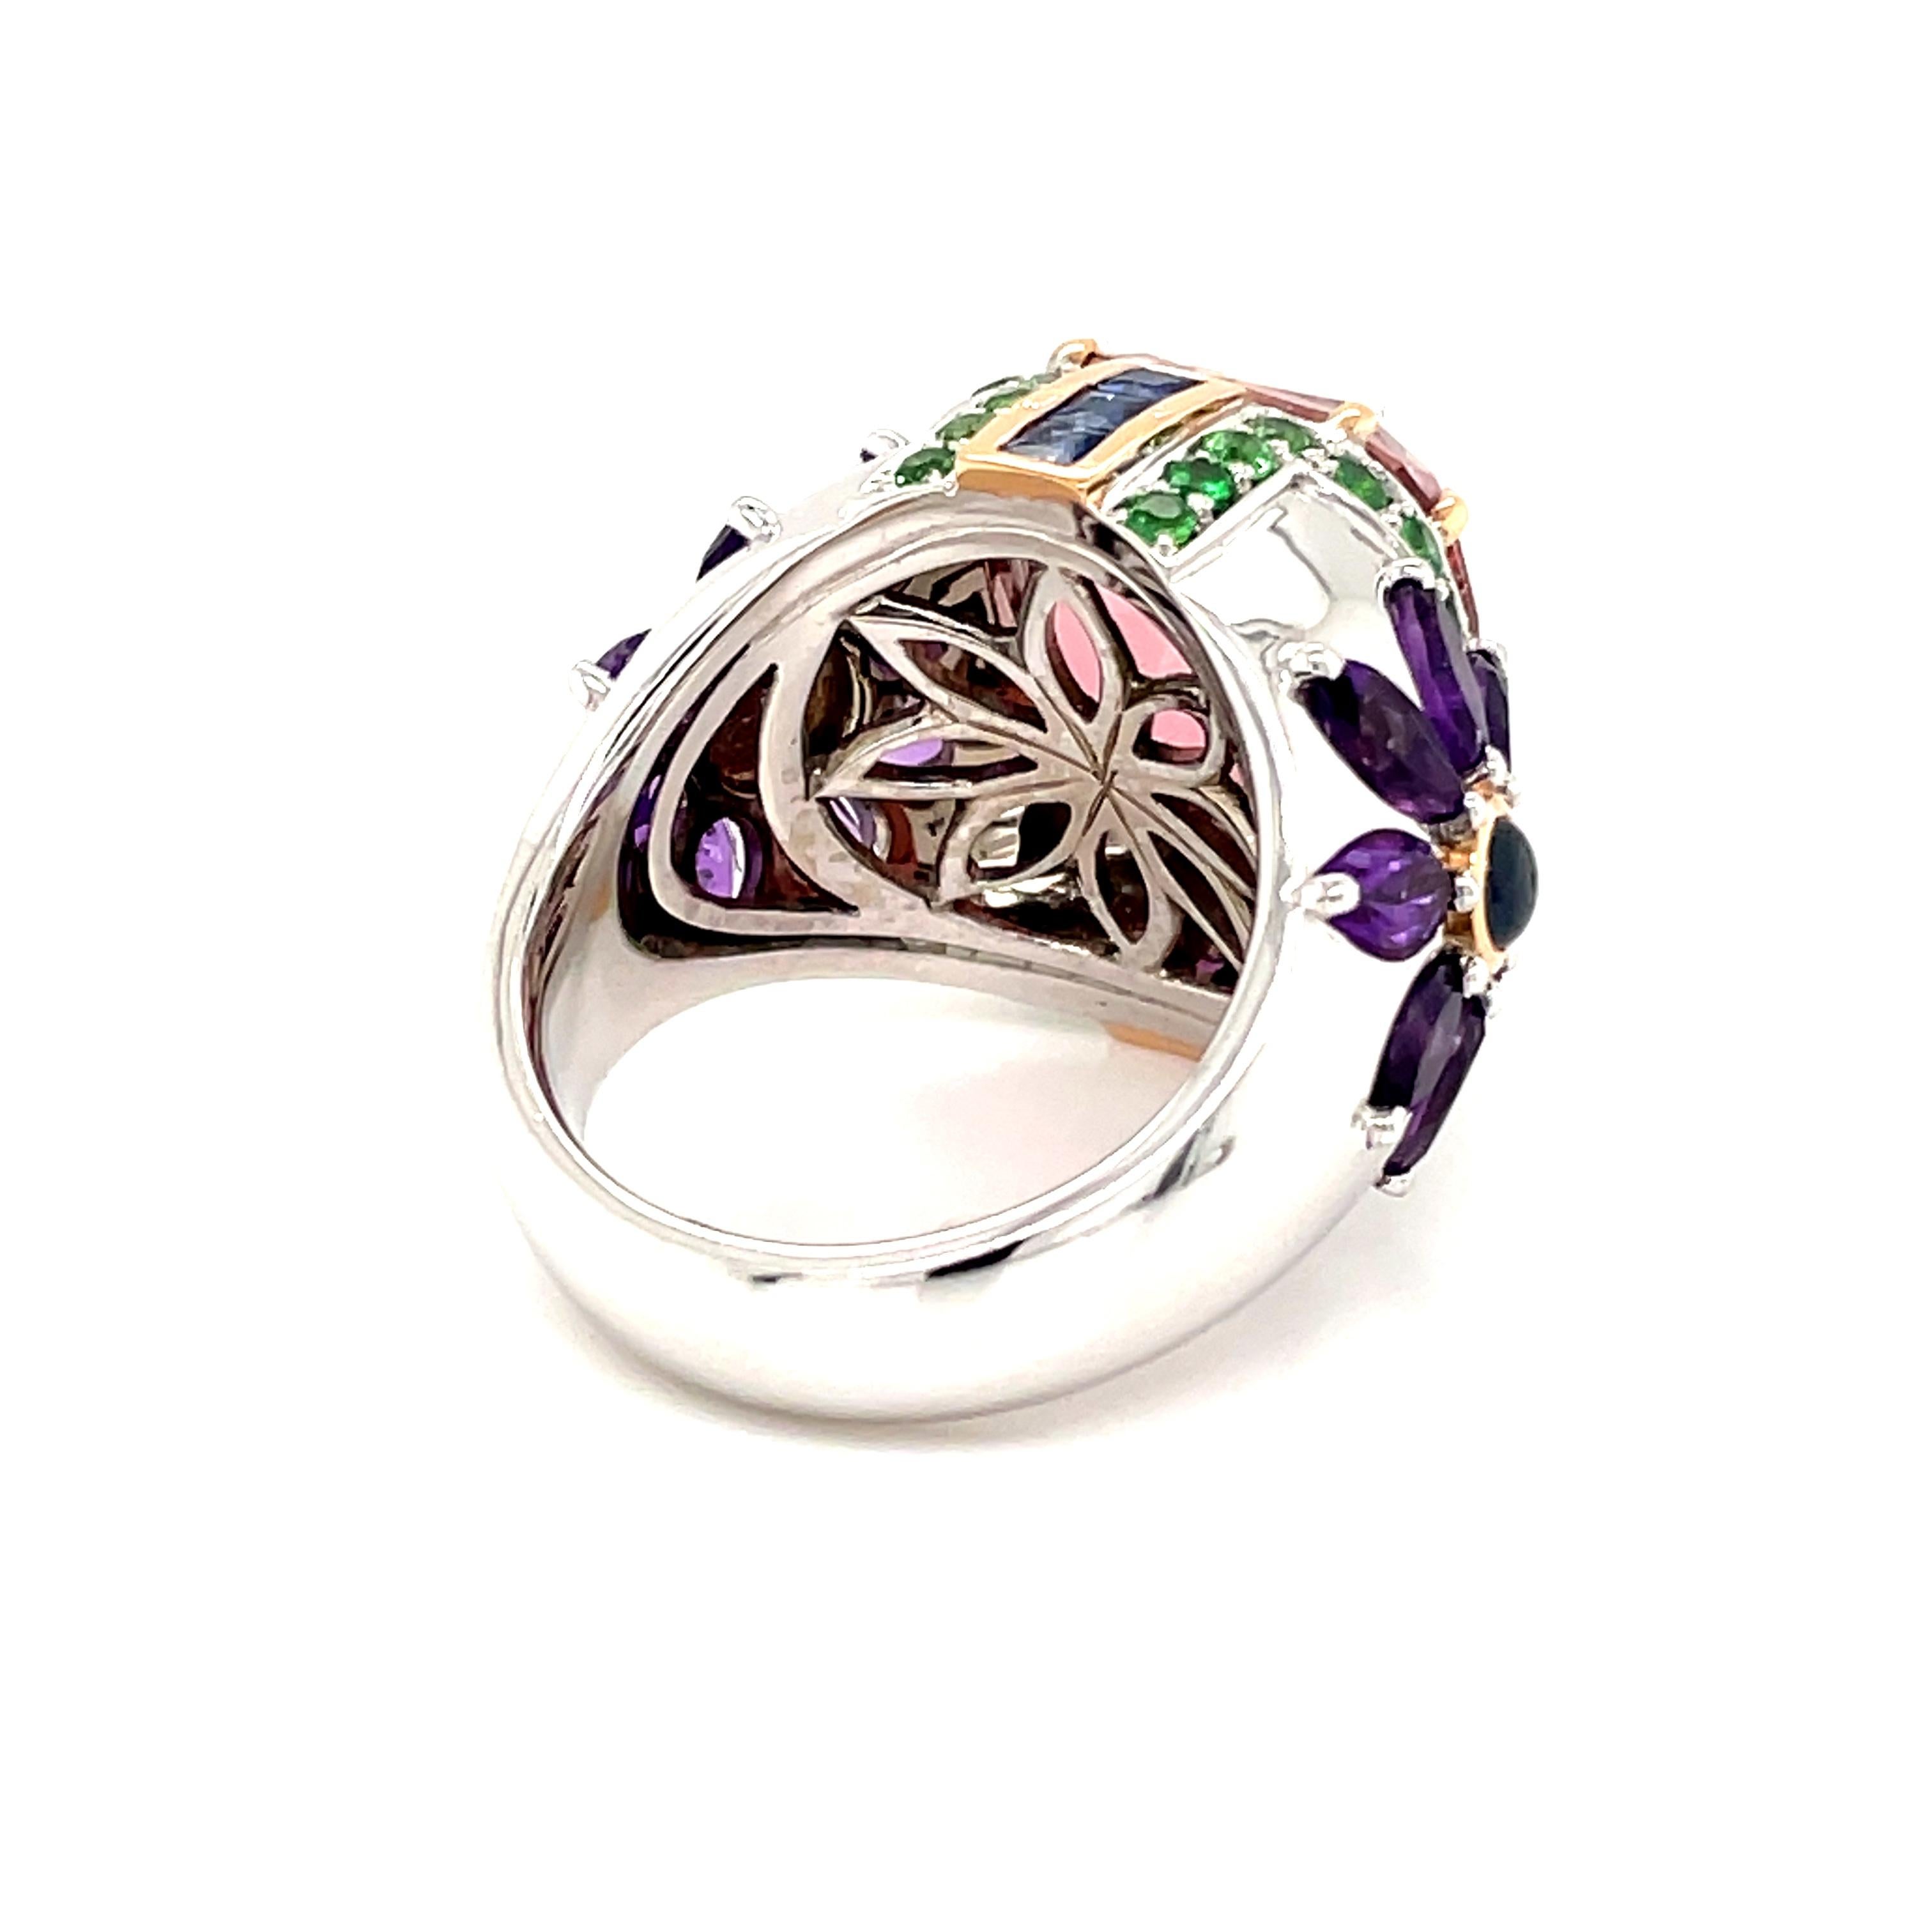 10.51ct Tourmaline Cocktail Ring with Garnets, Sapphires & Amethyst by Musson In New Condition For Sale In SYDNEY, AU